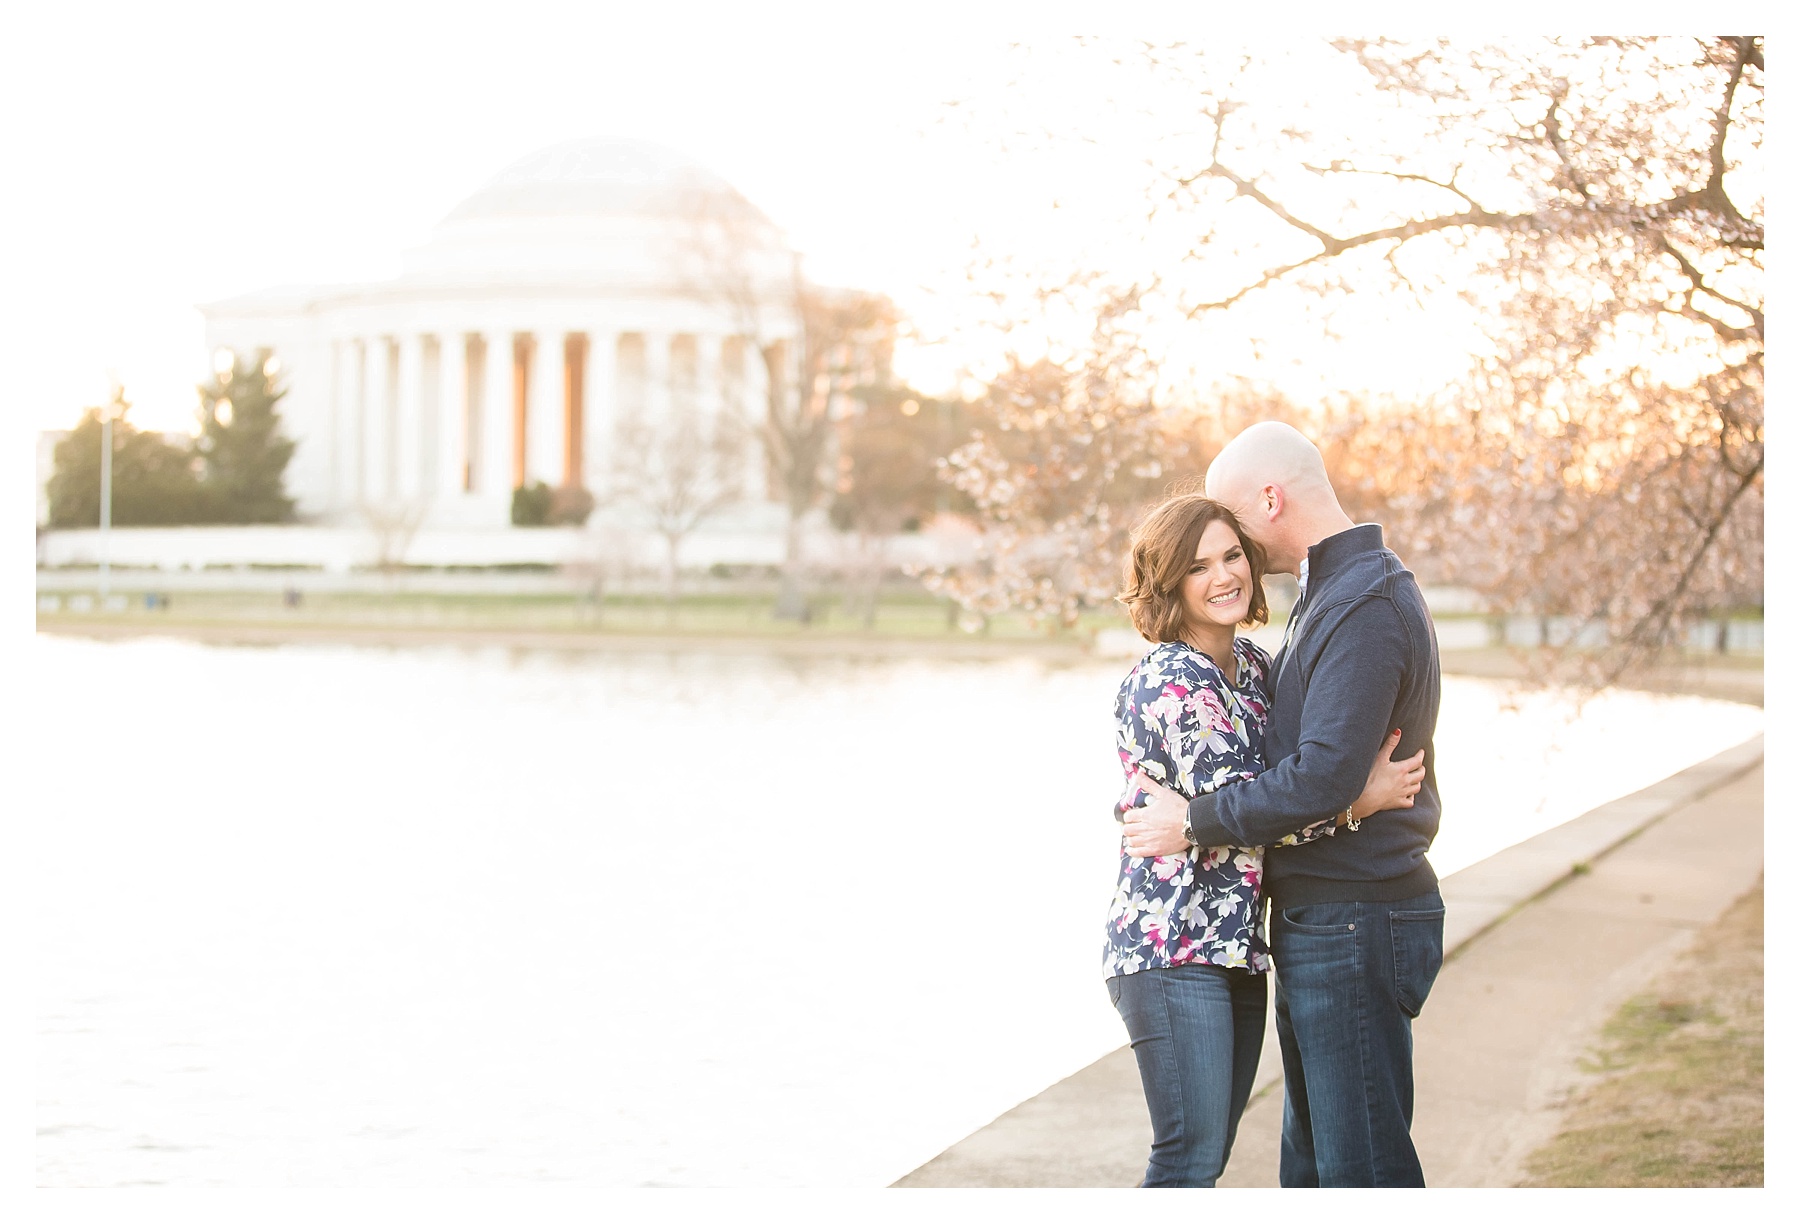 Candice Adelle Photography DC Destination Wedding Photographer Cherry Blossom Engagment Session_0014.jpg